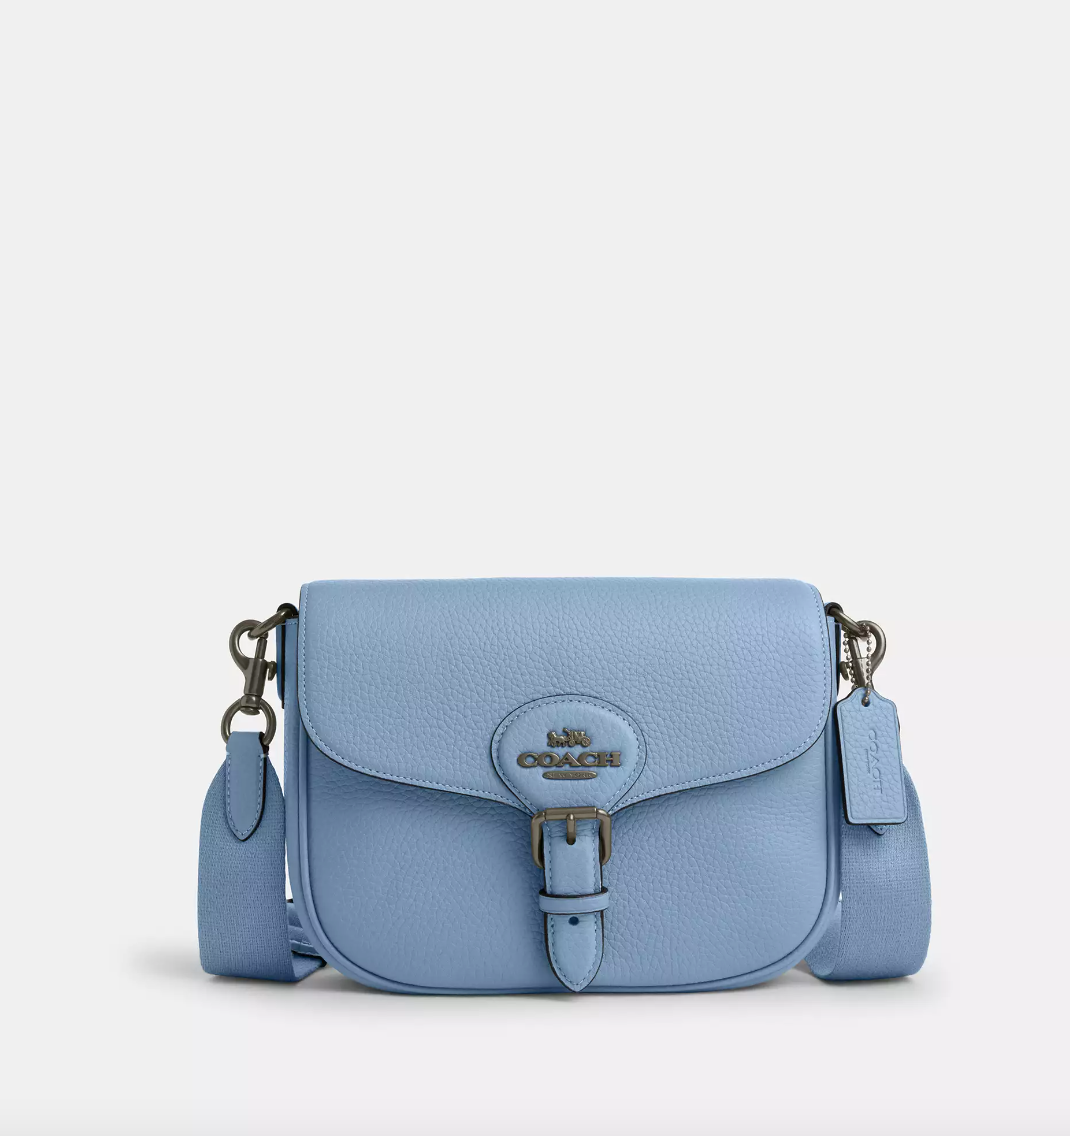 Coach Amelia Saddle Bag In Conflower (Pre-Order)